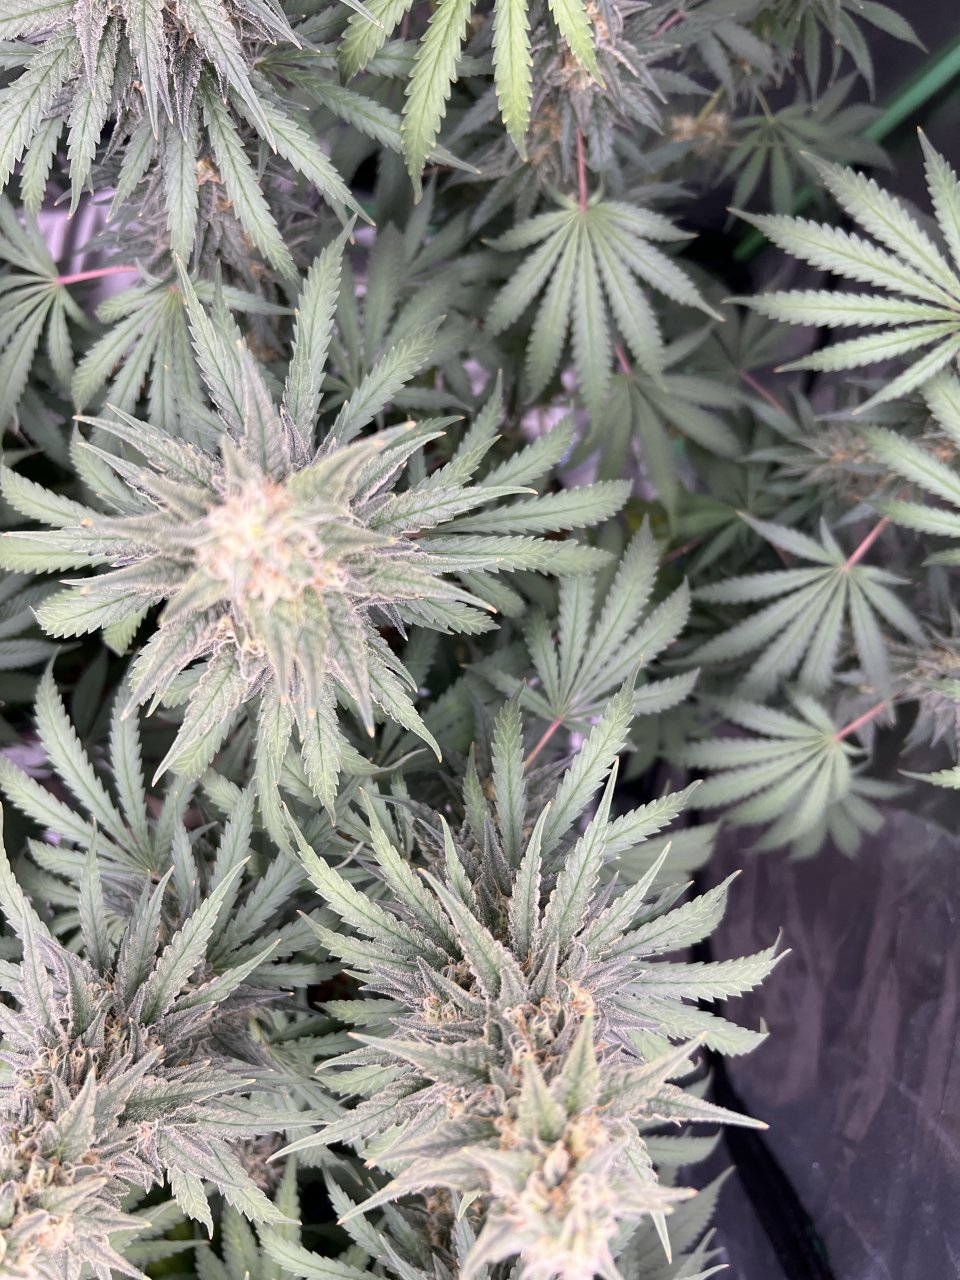 Watermelon canopy Day 78 and day 40 of flower